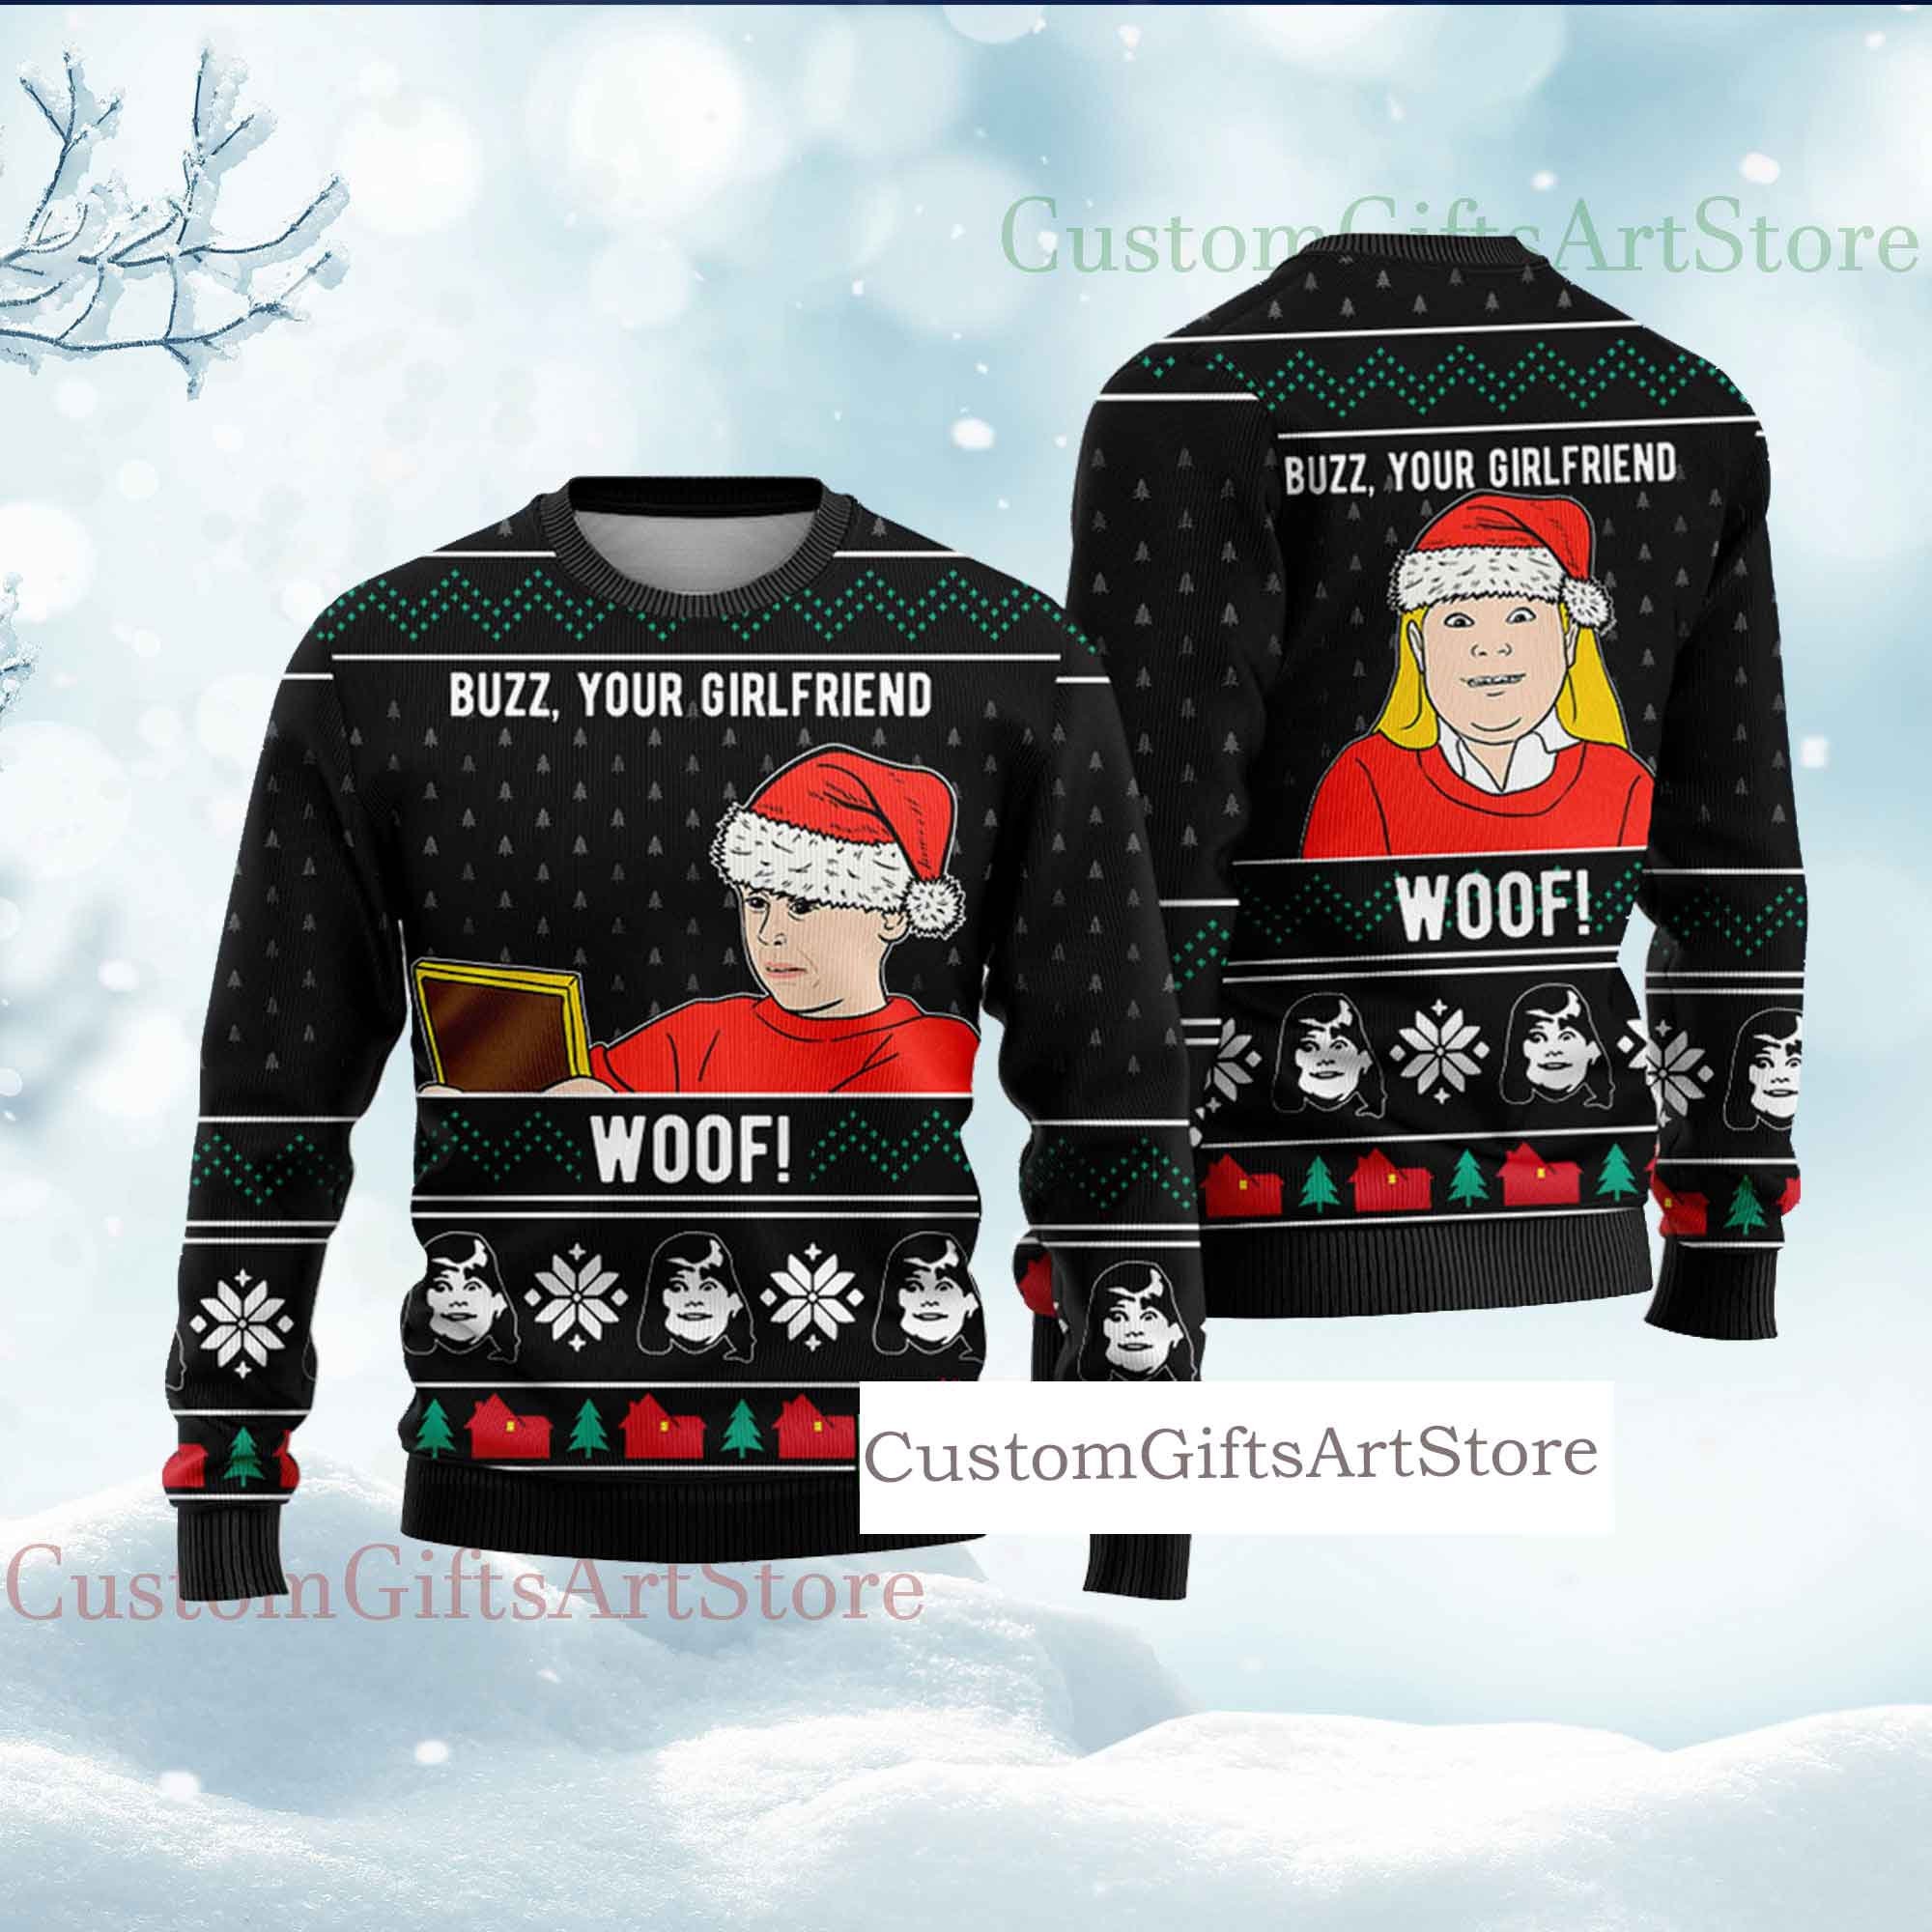 Discover Buzz Your Girlfriend Ugly Sweater 3D, Funny home Kevin Parody xmas movies party gift